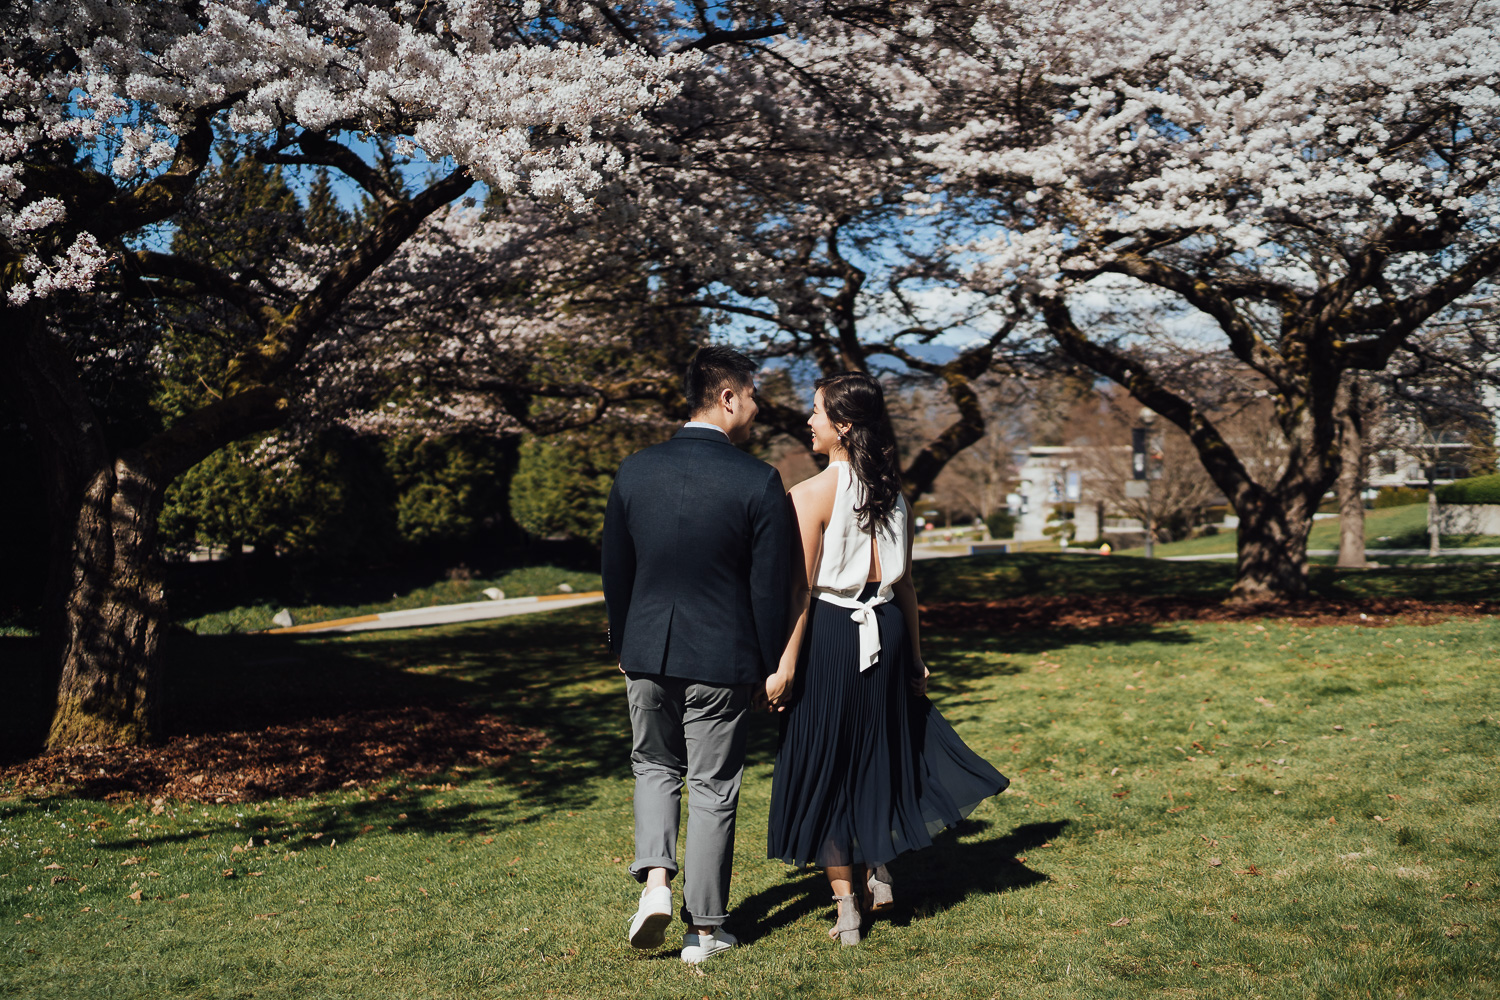 vancouver engagement photography during cherry blossom season at UBC